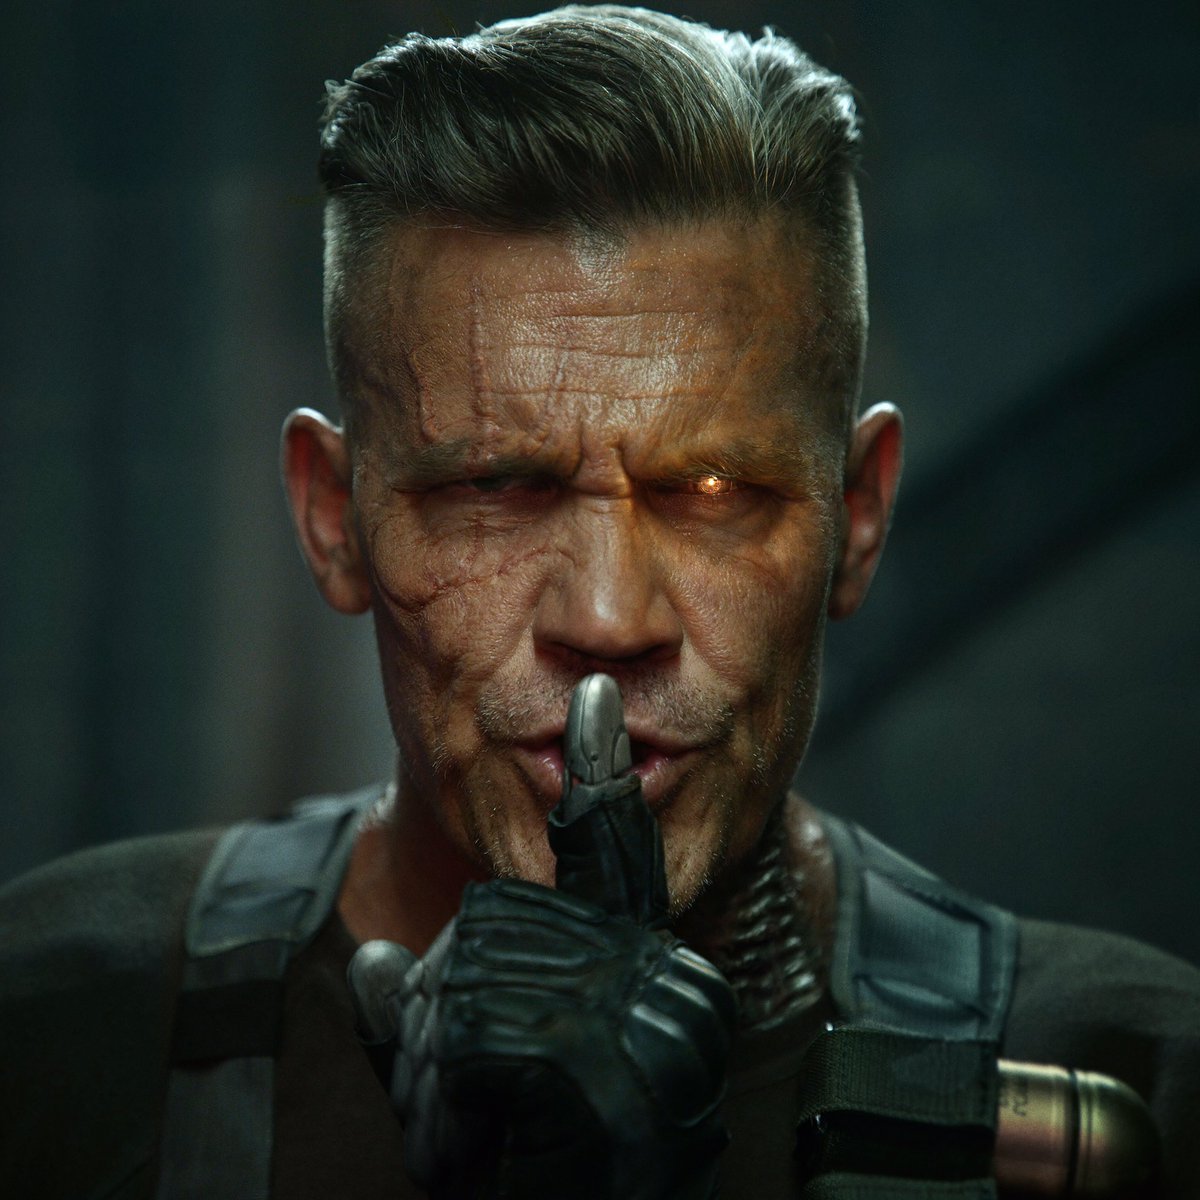 Is Cable Deadpool's son?